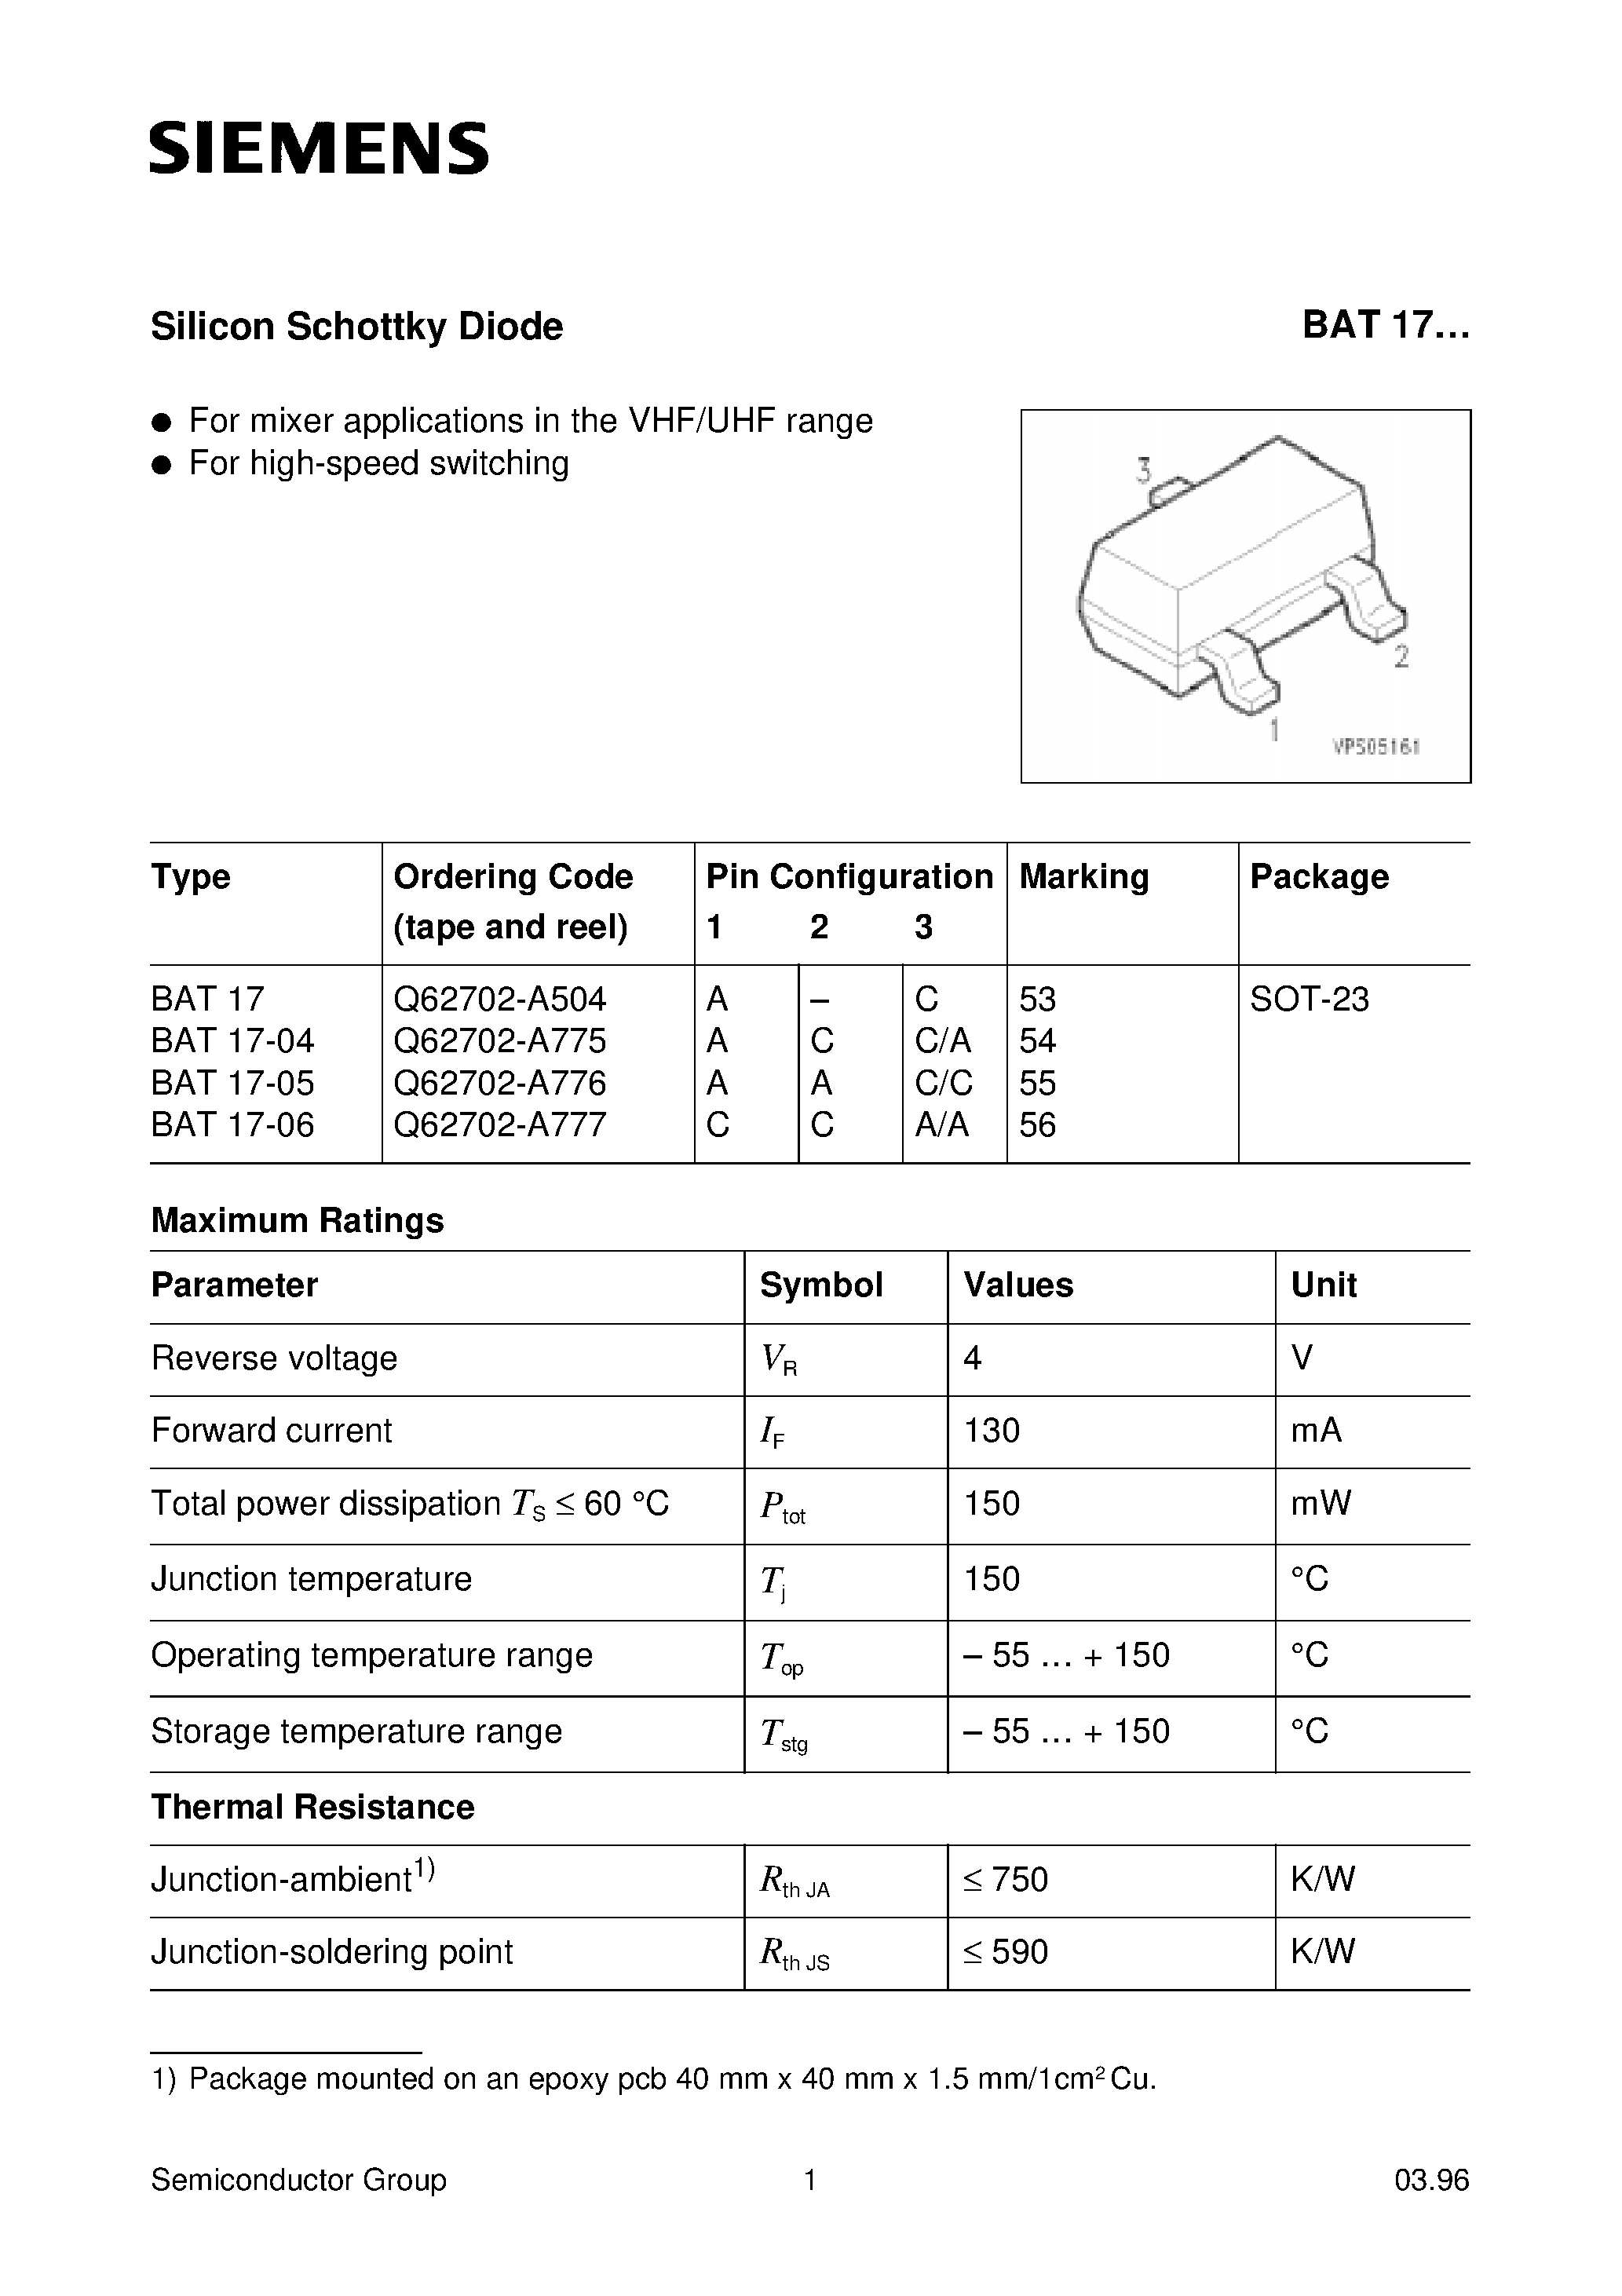 Datasheet BAT17-04 - Silicon Schottky Diode (For mixer applications in the VHF/UHF range For high-speed switching) page 1